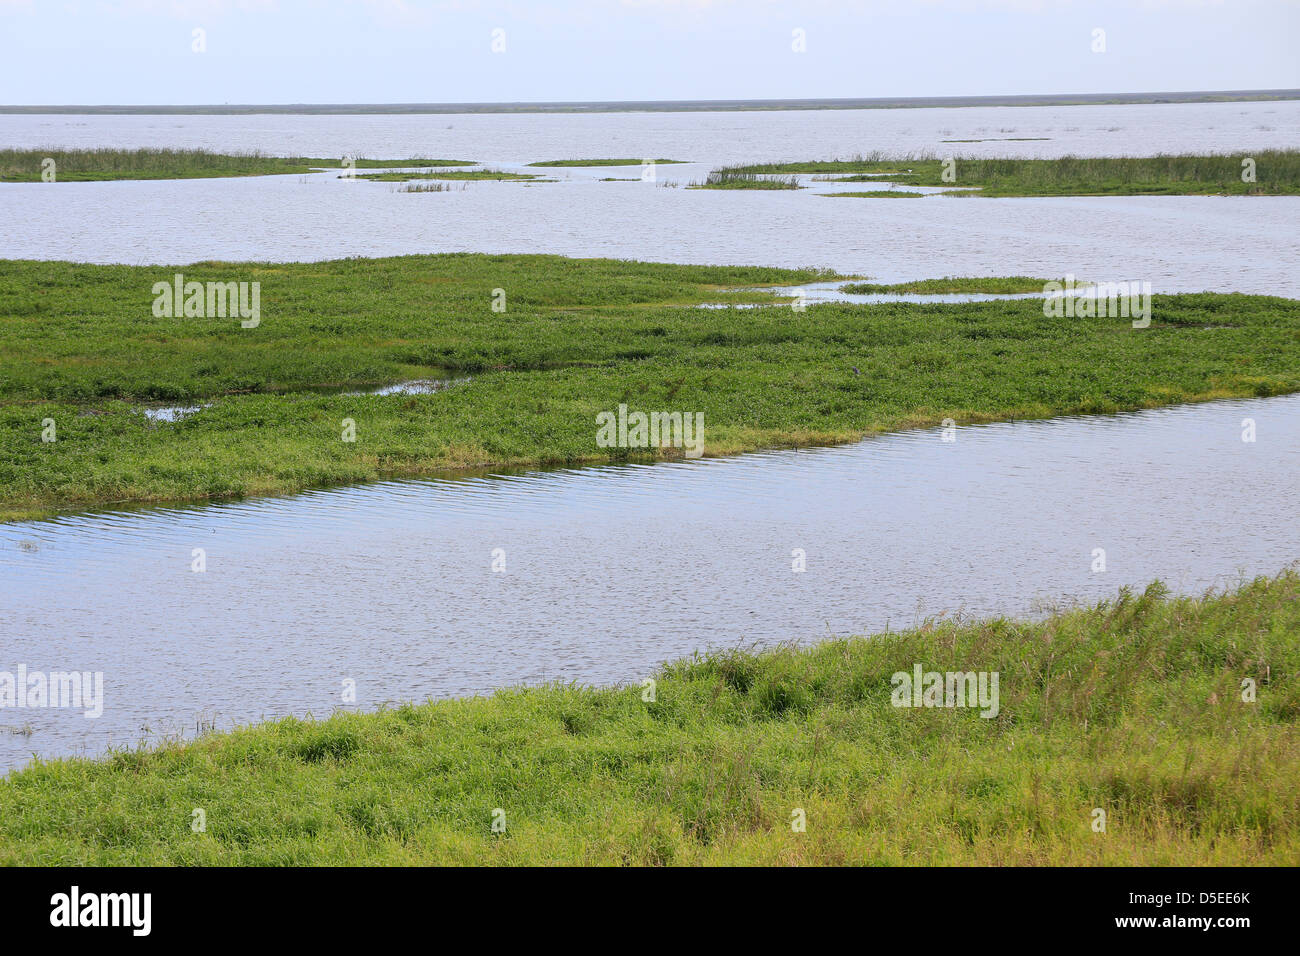 A view of Lake Okeechobee from above near Lakeport Florida USA Stock Photo